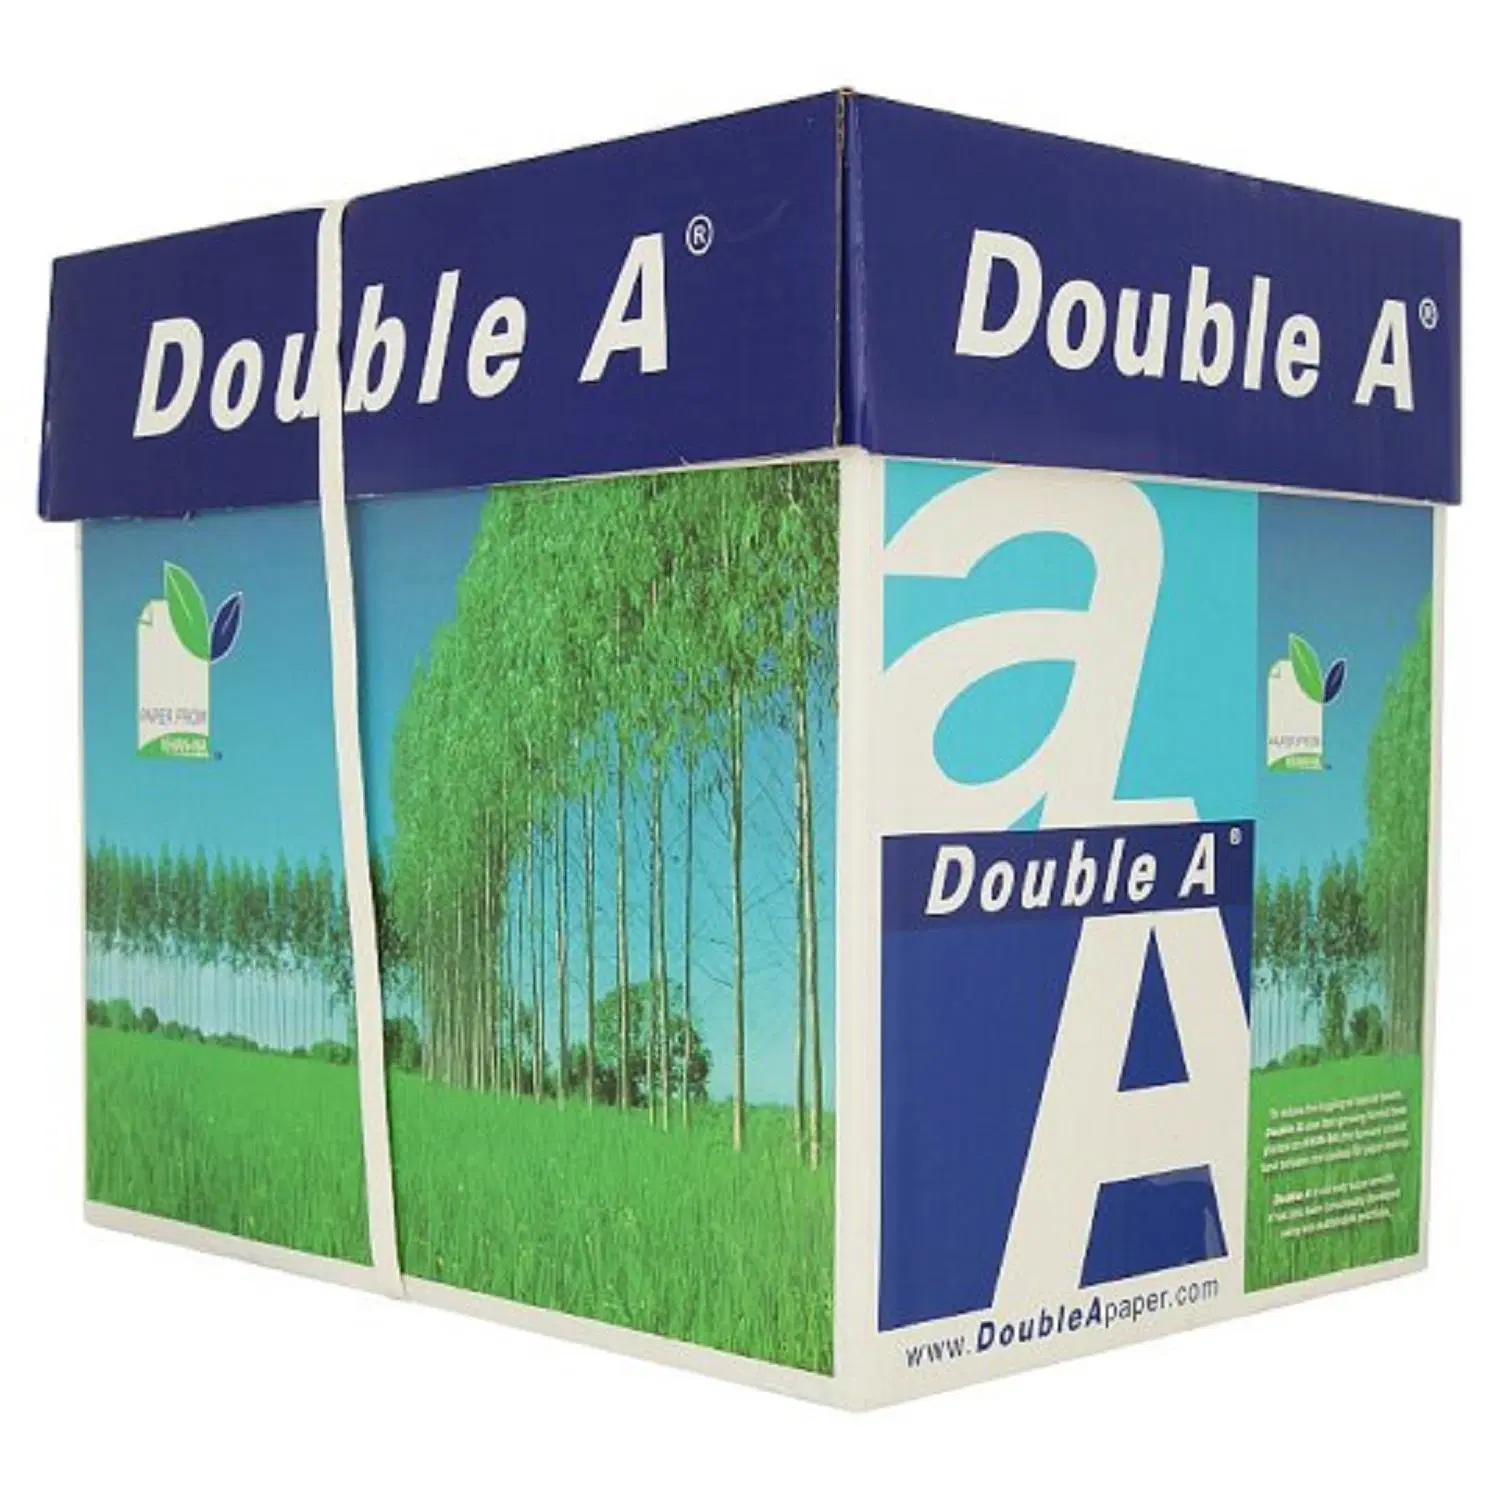 Premium 70 GSM/80 GSM A4 Paper/ Copy Paper/Printer Paper for Office and School Supplies